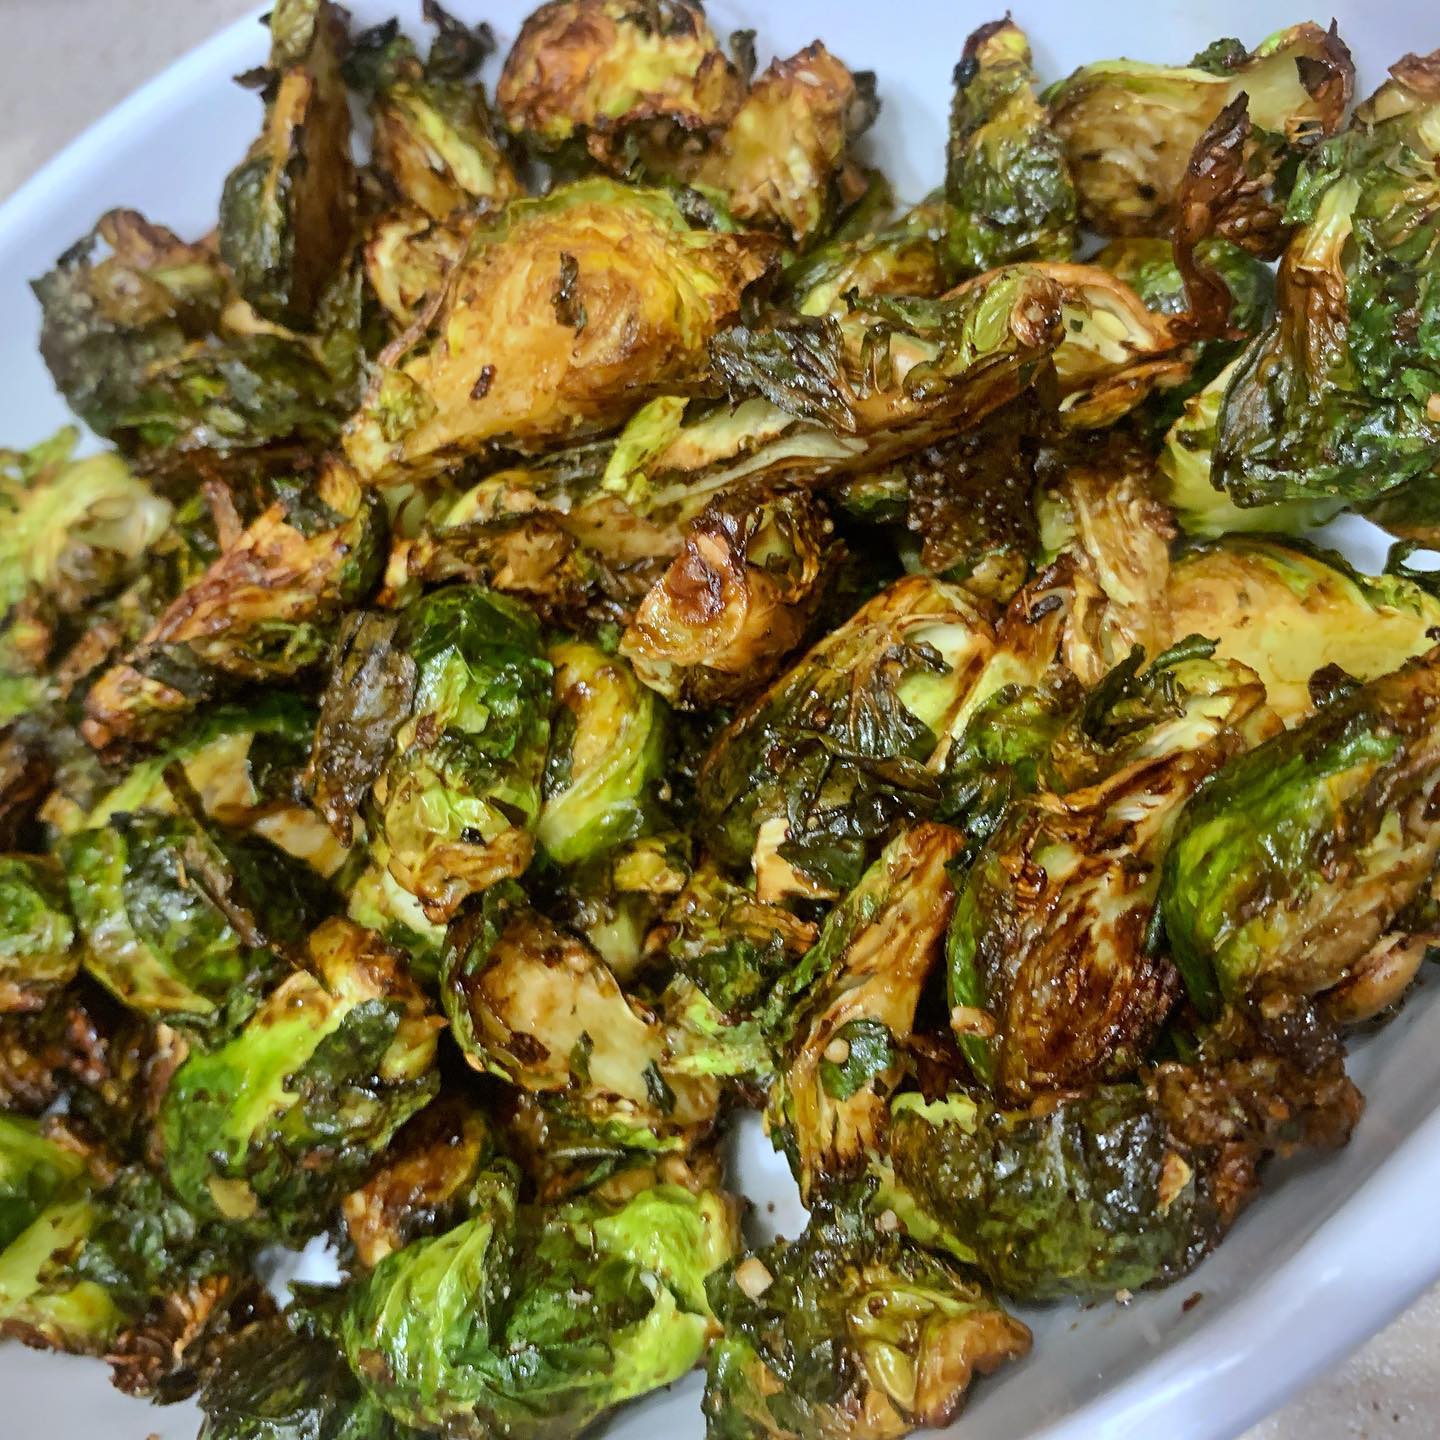 Air-fryer Brussel sprouts with orange balsamic glaze for the win 🙌 
Check out our wing-it recipe below 👇 

⛔️ measurements are approximate because it’s all about the flavor you’re hoping to achieve.)

1lb fresh  #brusselsprouts cut in half

Put cut pieces in #airfryer fryer basket, spray lightly with avocado oil. Toss with seasoning. 

Our seasoning of choice - @pamperedchef season salt and  3 onion rub (add as much as you’d like for taste) 

Air fry 400* 15 min
Toss halfway through

Add 1-2 t fresh minced garlic and a few shakes (or 10 😉 ) of grated Parmesan cheese, toss and cook 3-4 more minutes at 400*

Sauce - 1/4 c balsamic glaze
1T low sodium soy sauce 
1-2t orange juice (no pulp)

Toss in glazed and eat it up! 😋